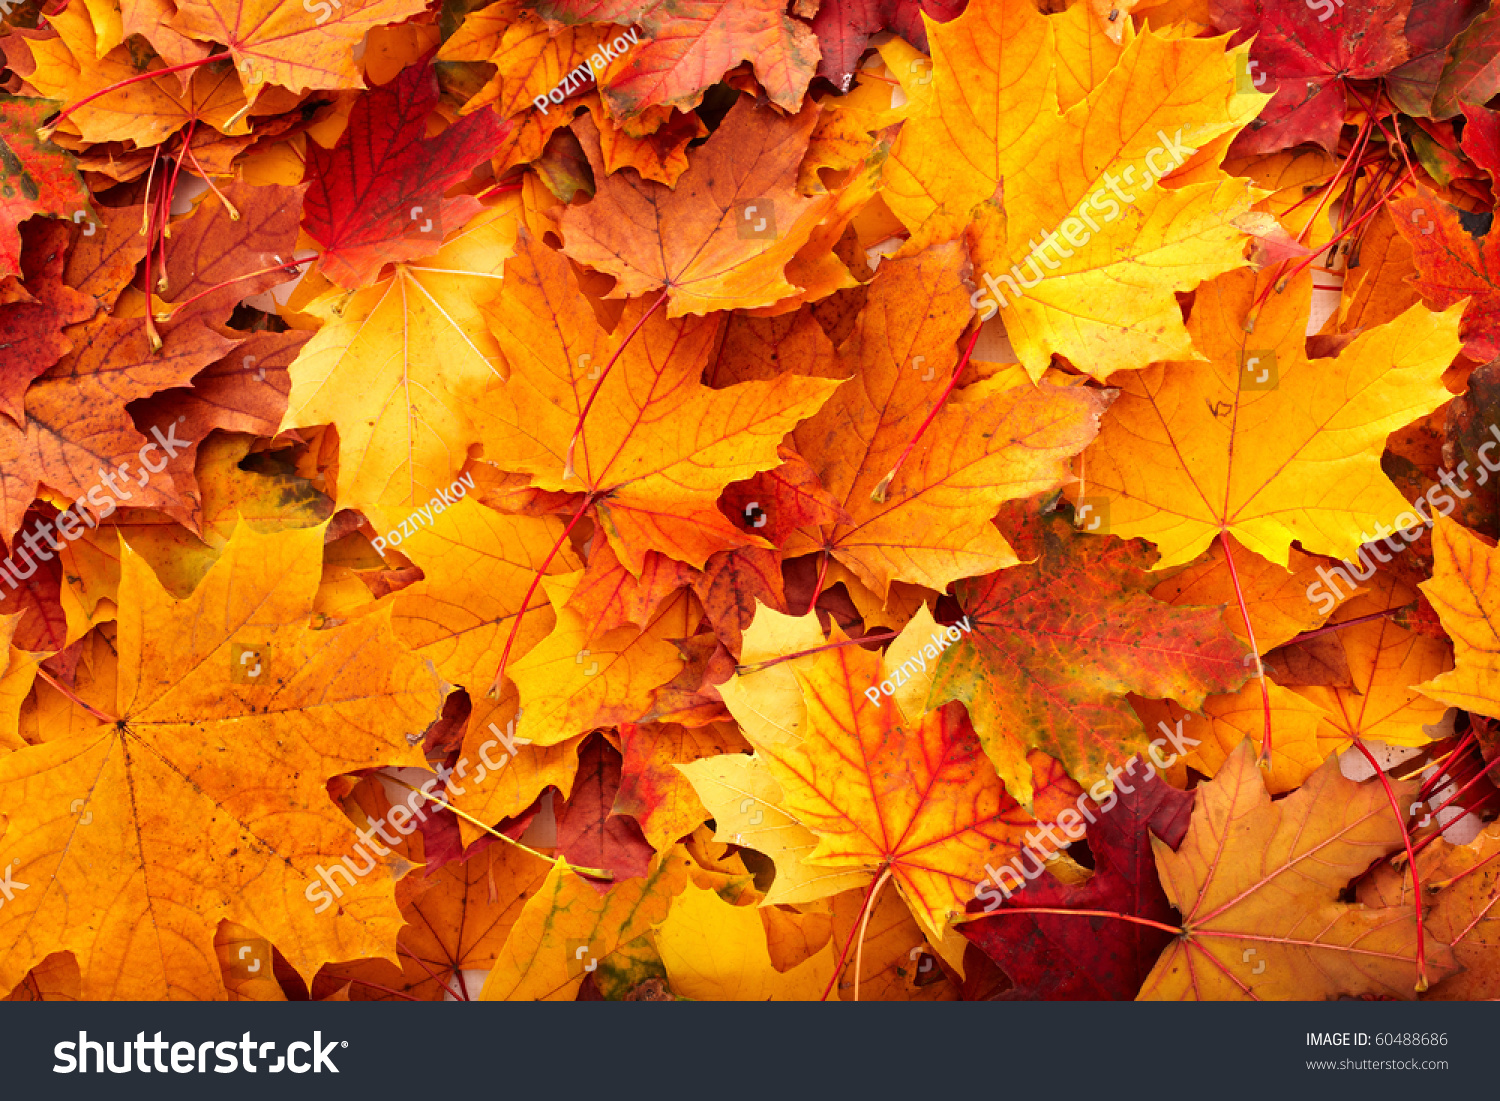 Background group autumn orange leaves. Outdoor. #60488686